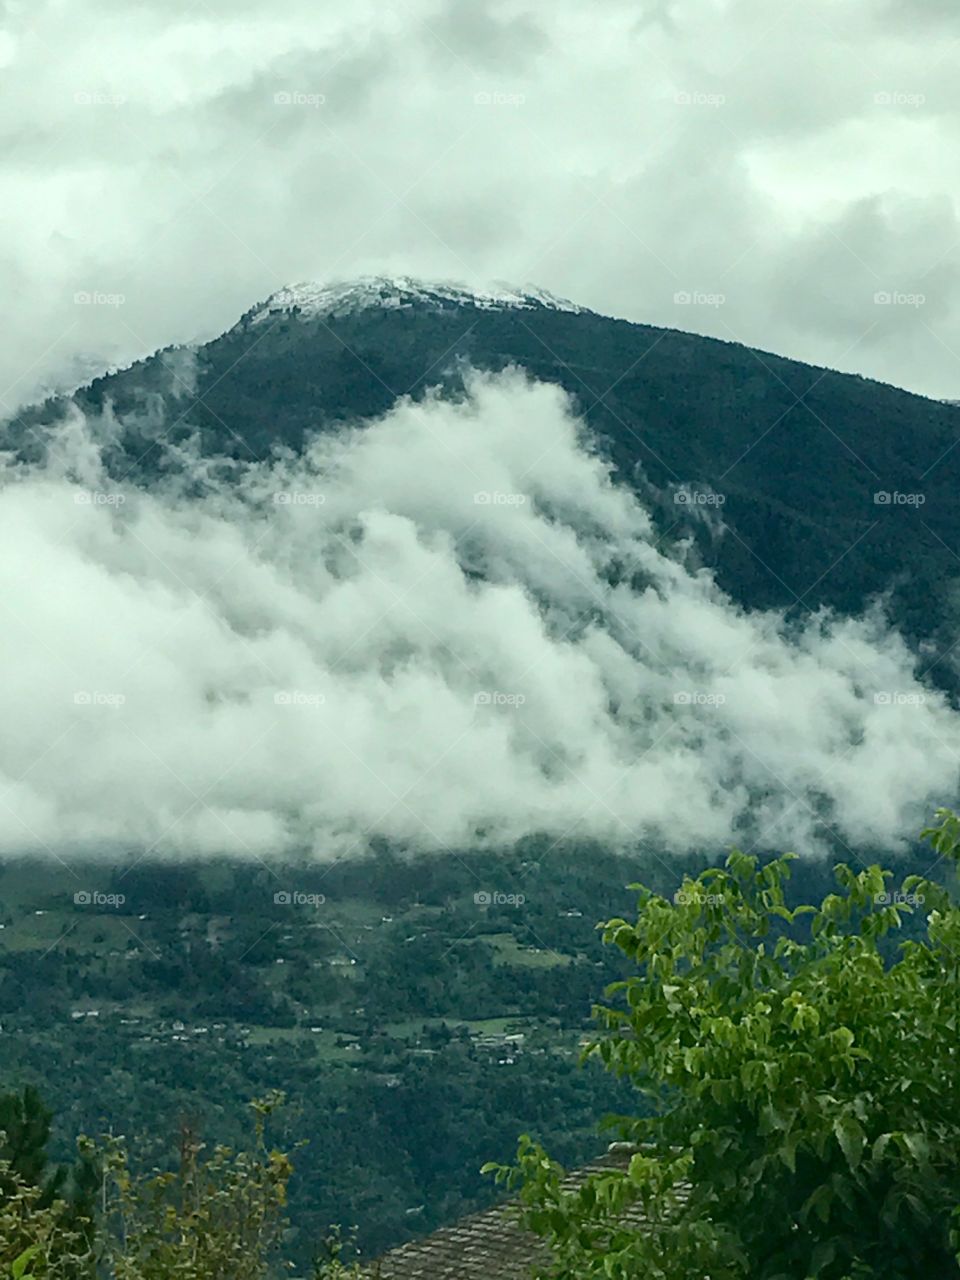 Cloud on the mountain